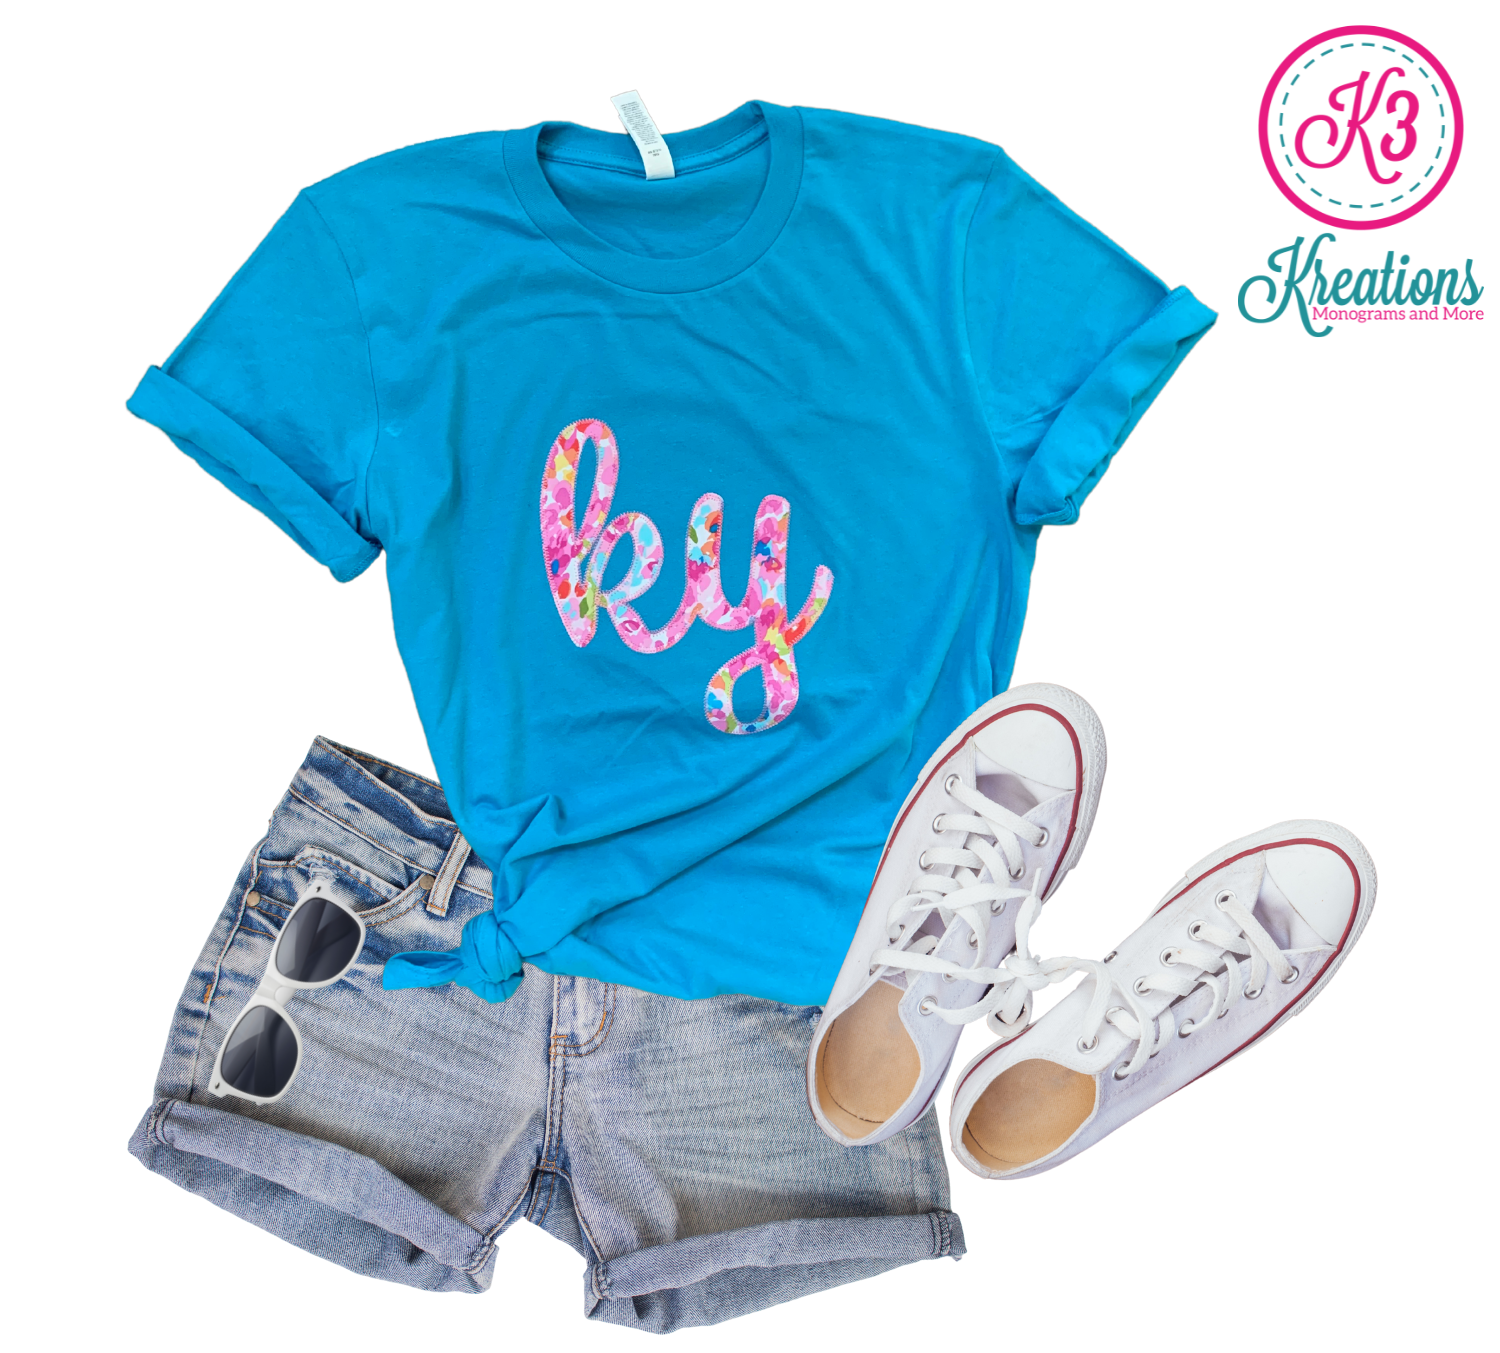 Adult Watercolor Ky Embroidered Aqua Short Sleeve Tee